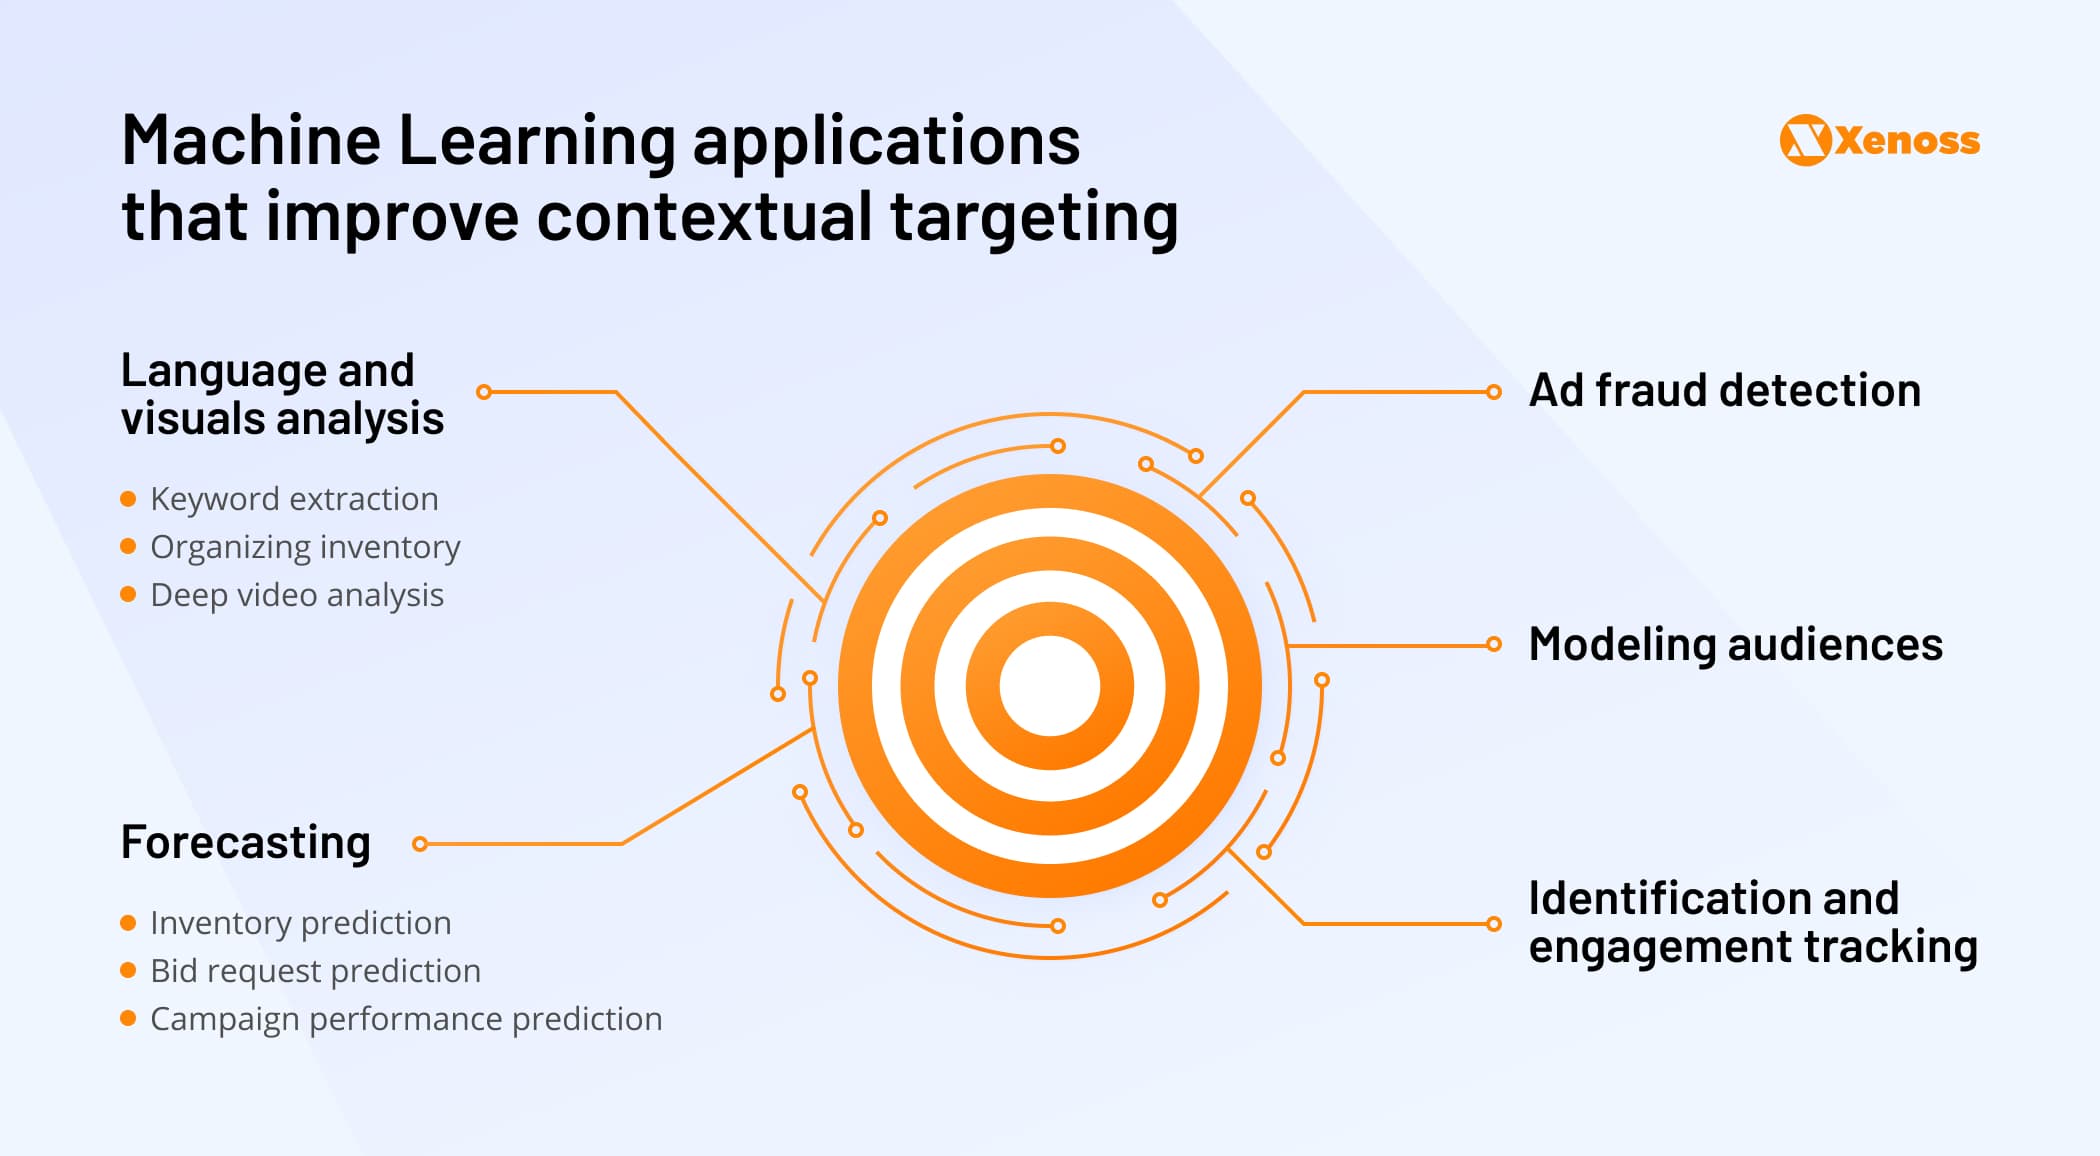 Machine Learning applications that improve contextual targeting in CTV